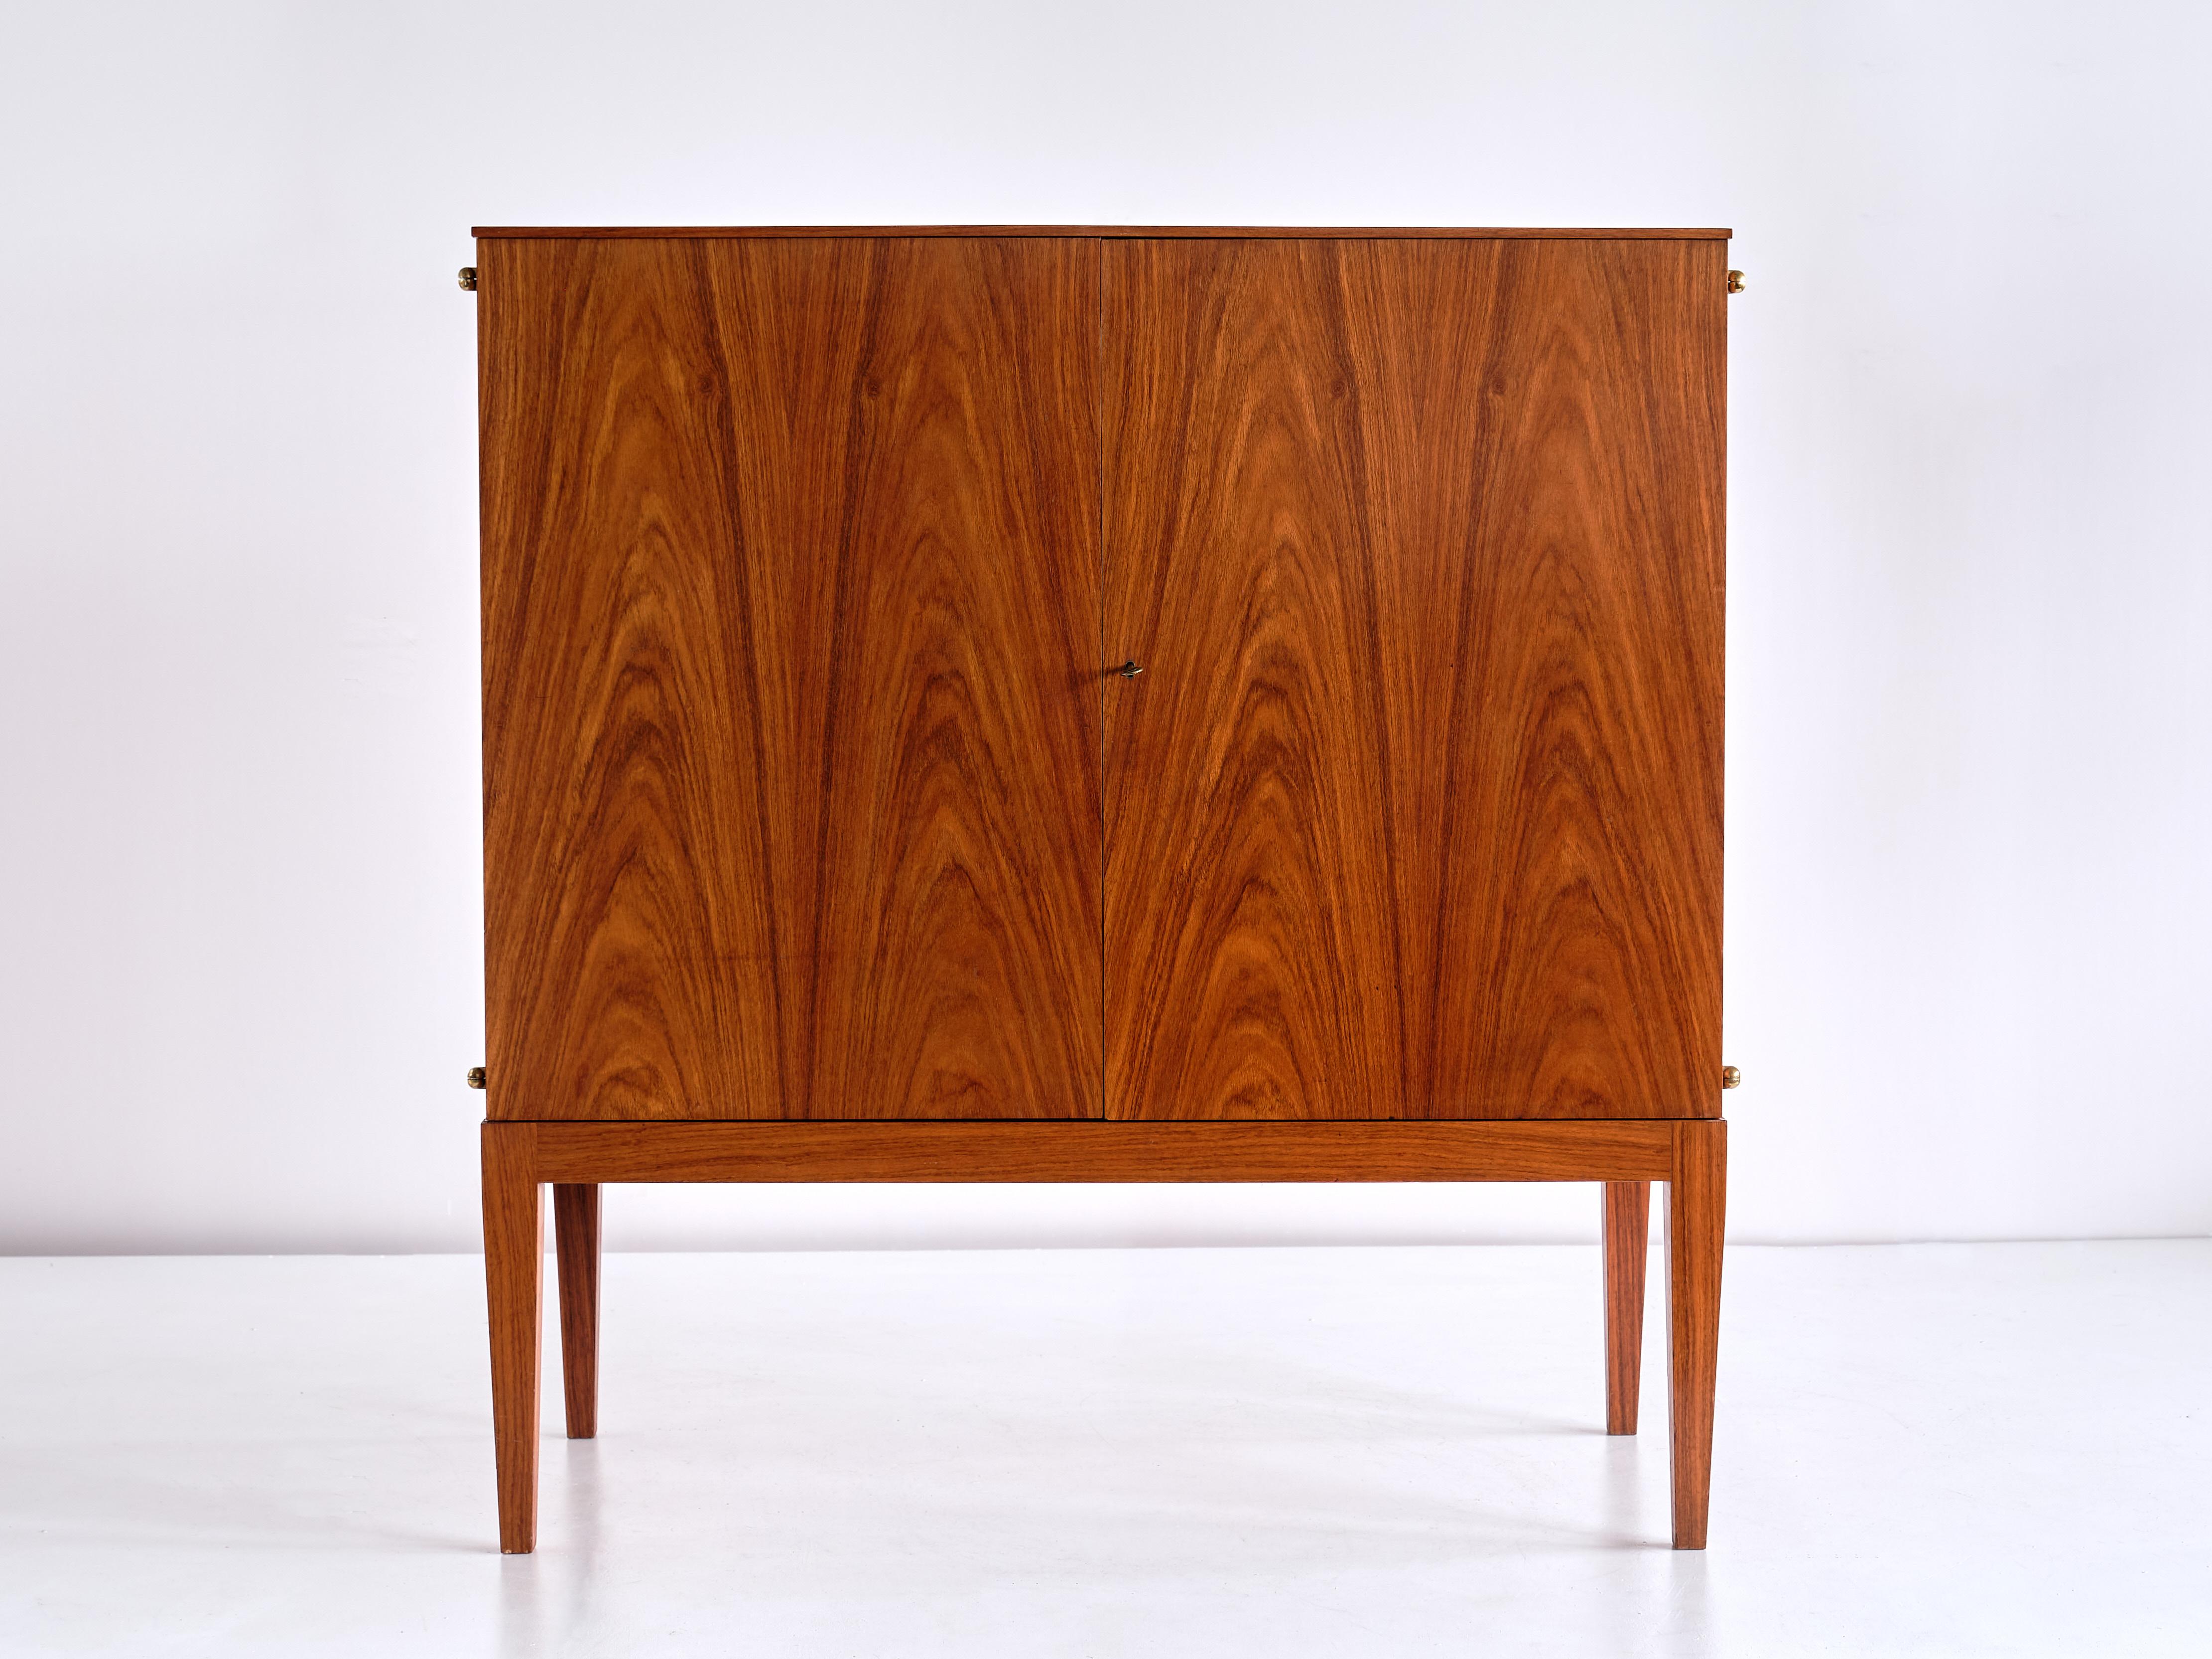 This elegant rosewood cabinet was designed by Josef Frank for Svenskt Tenn in the late 1930's. In the Svensk Tenn archive's furniture book, Estrid Ericson (the founder of Svenskt Tenn) has made a pencil sketch of the cabinet and written 